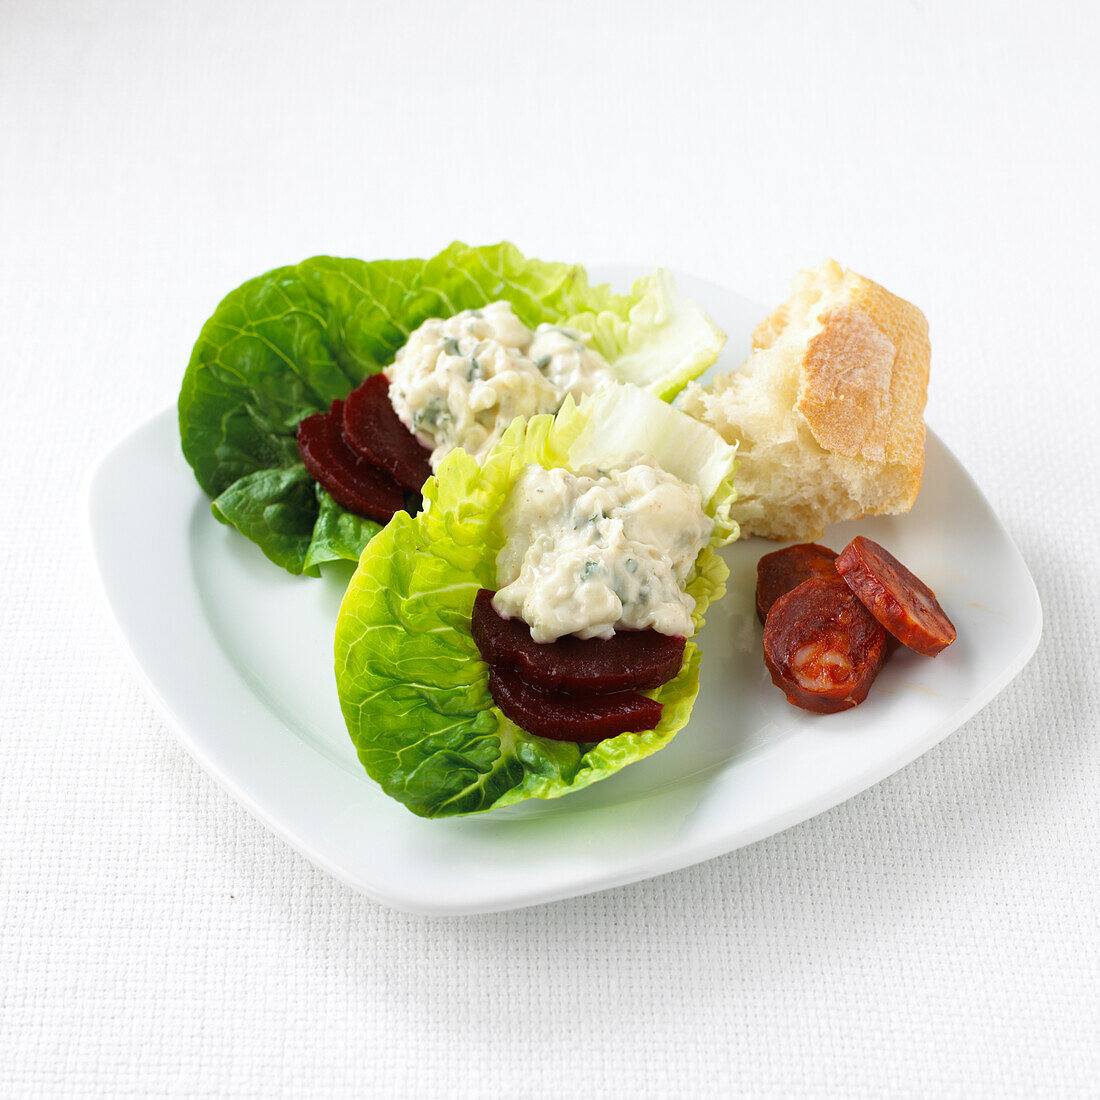 Baby gem lettuce with blue cheese and beetroot